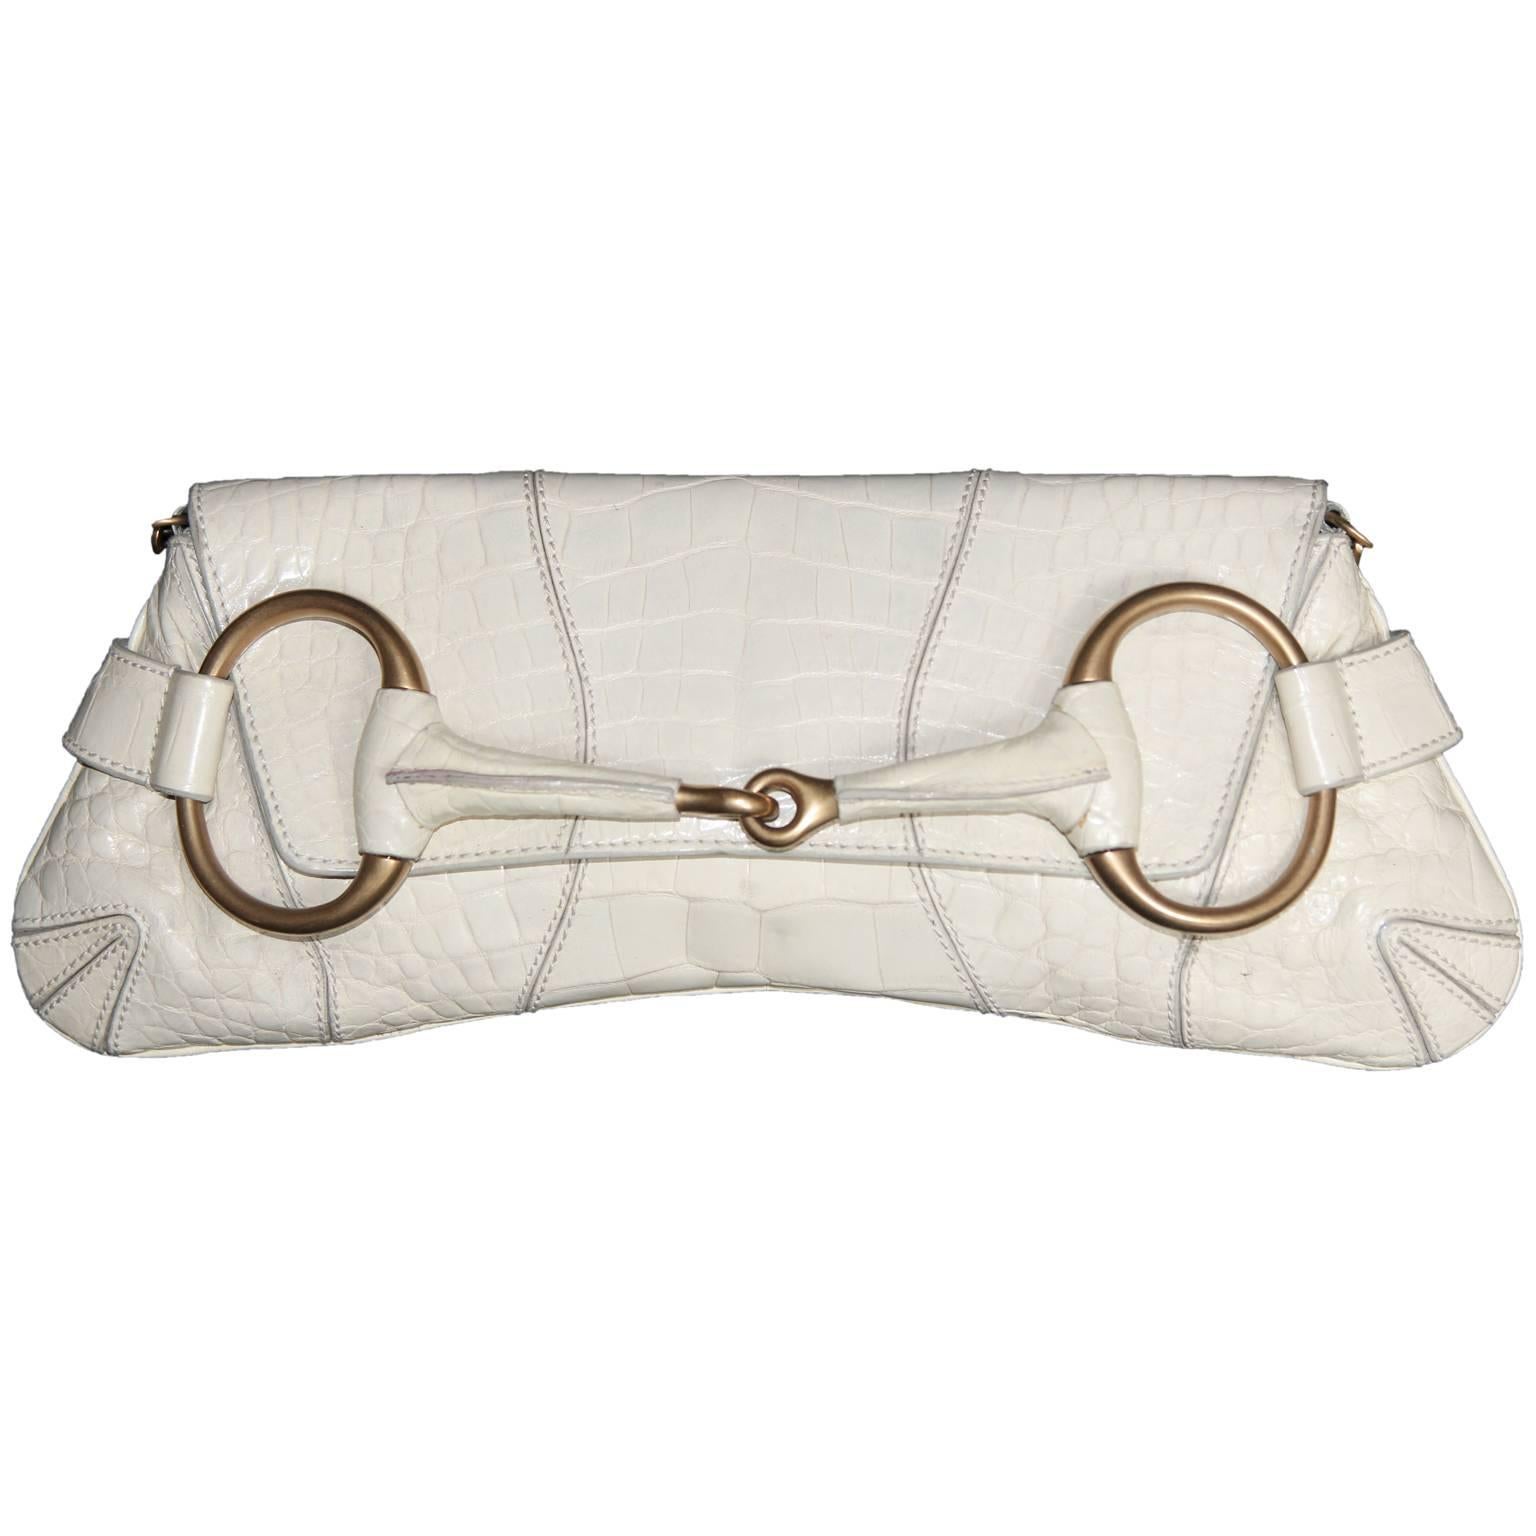 One of the most memorable Tom Ford for Gucci pieces of all... that ridiculously chic and incredibly rare Tom Ford for Gucci Fall Winter 2003 white croc gator crocodile alligator leather horsebit bag!

The Iconic Collections has been one of the